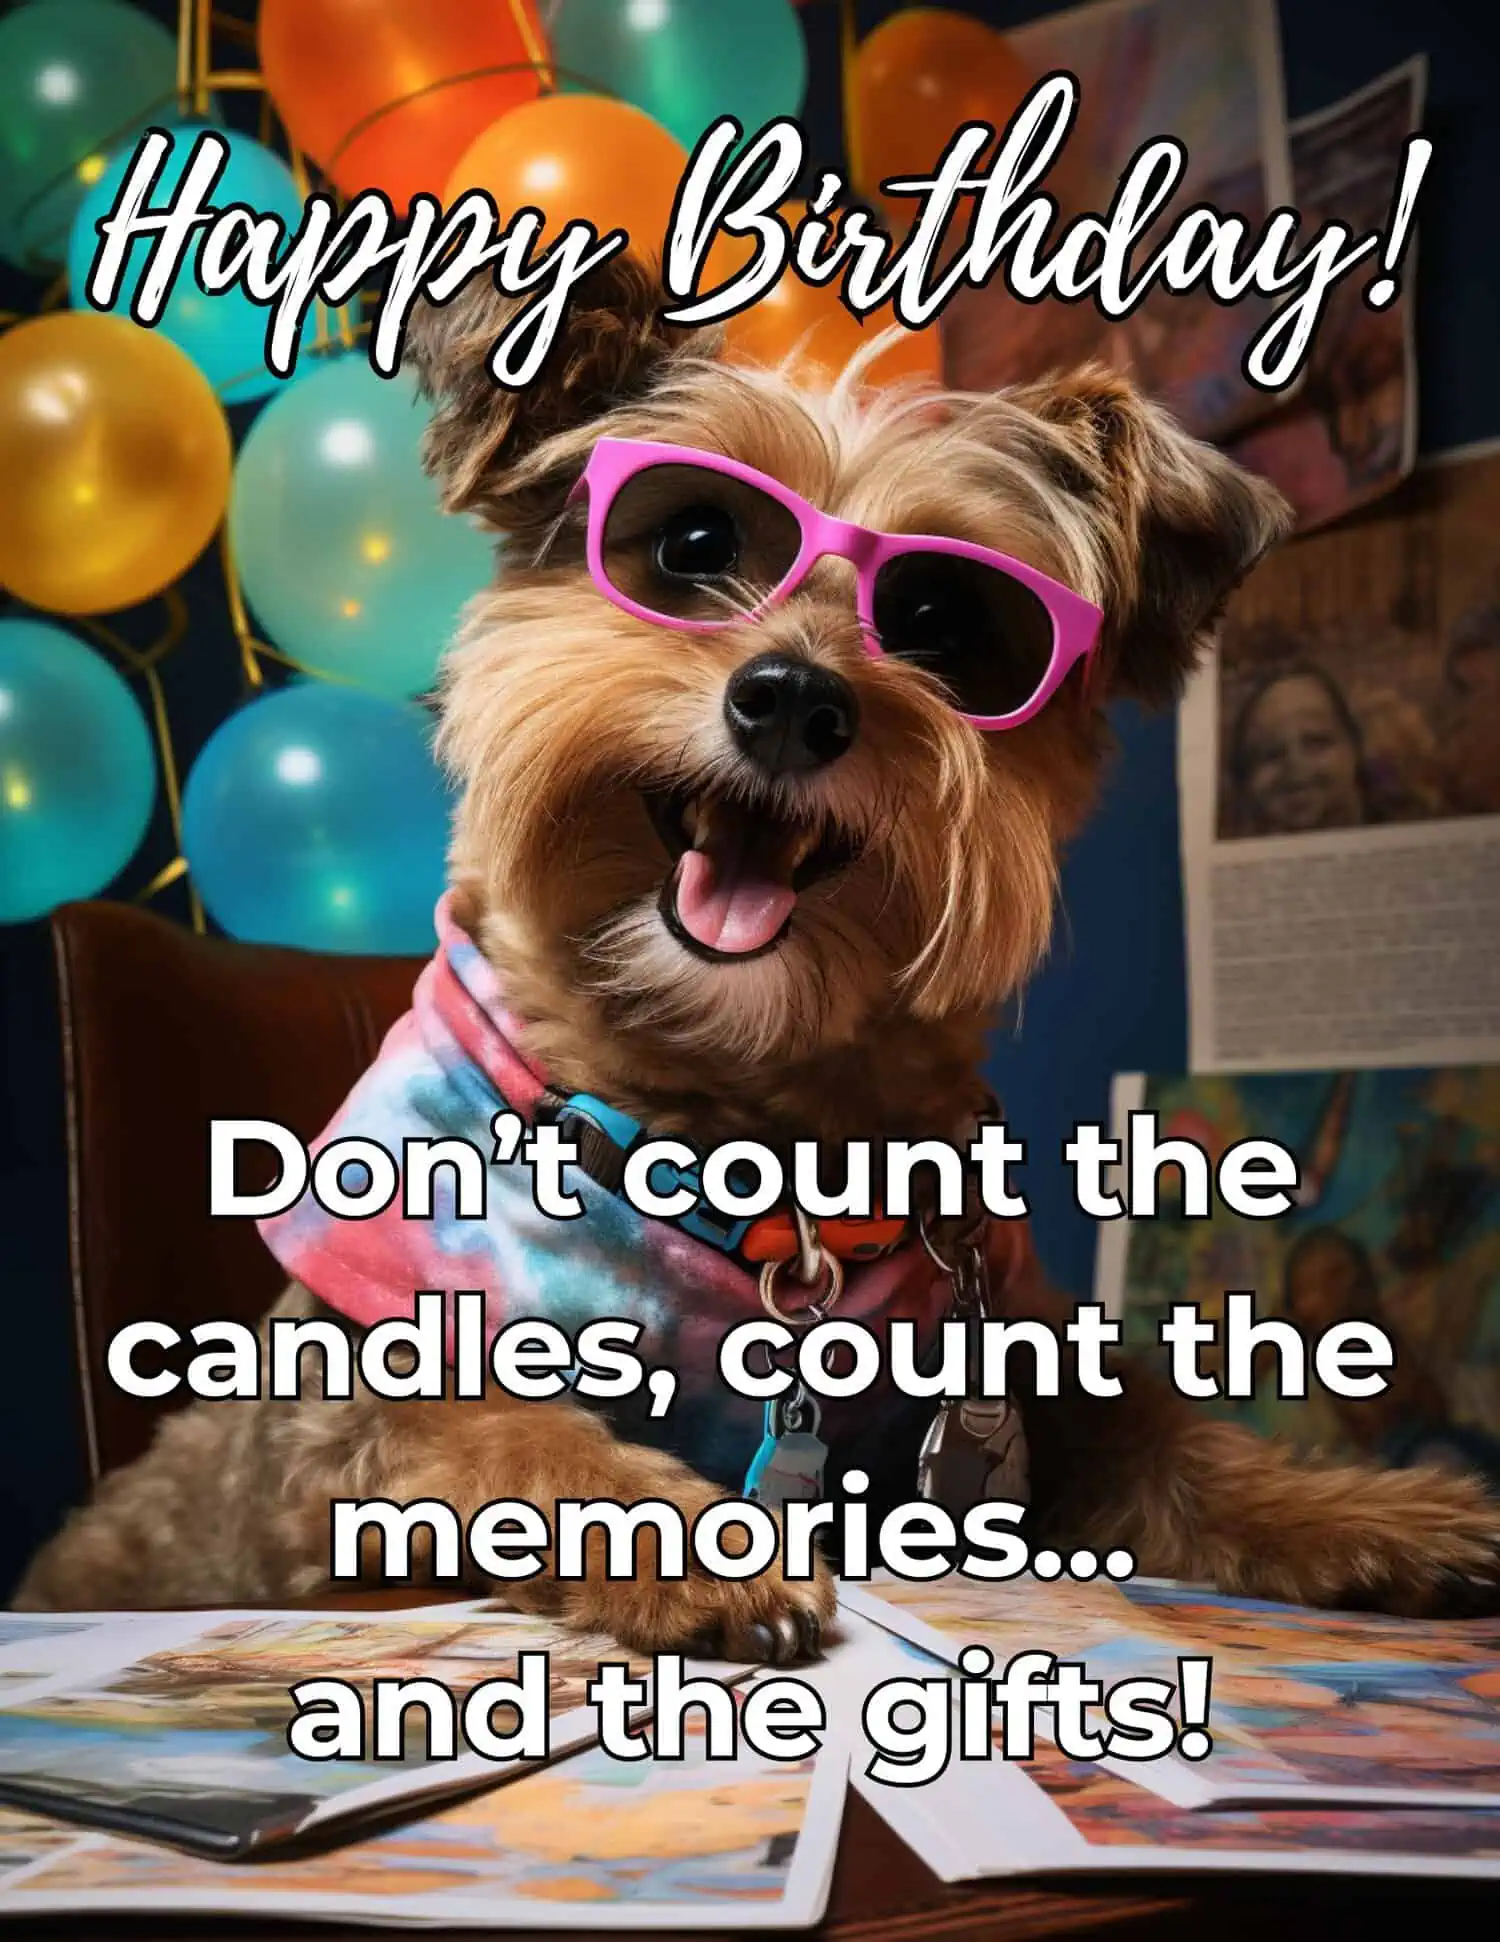 A humorous birthday card filled with laughter and cheer dedicated to a beloved niece.